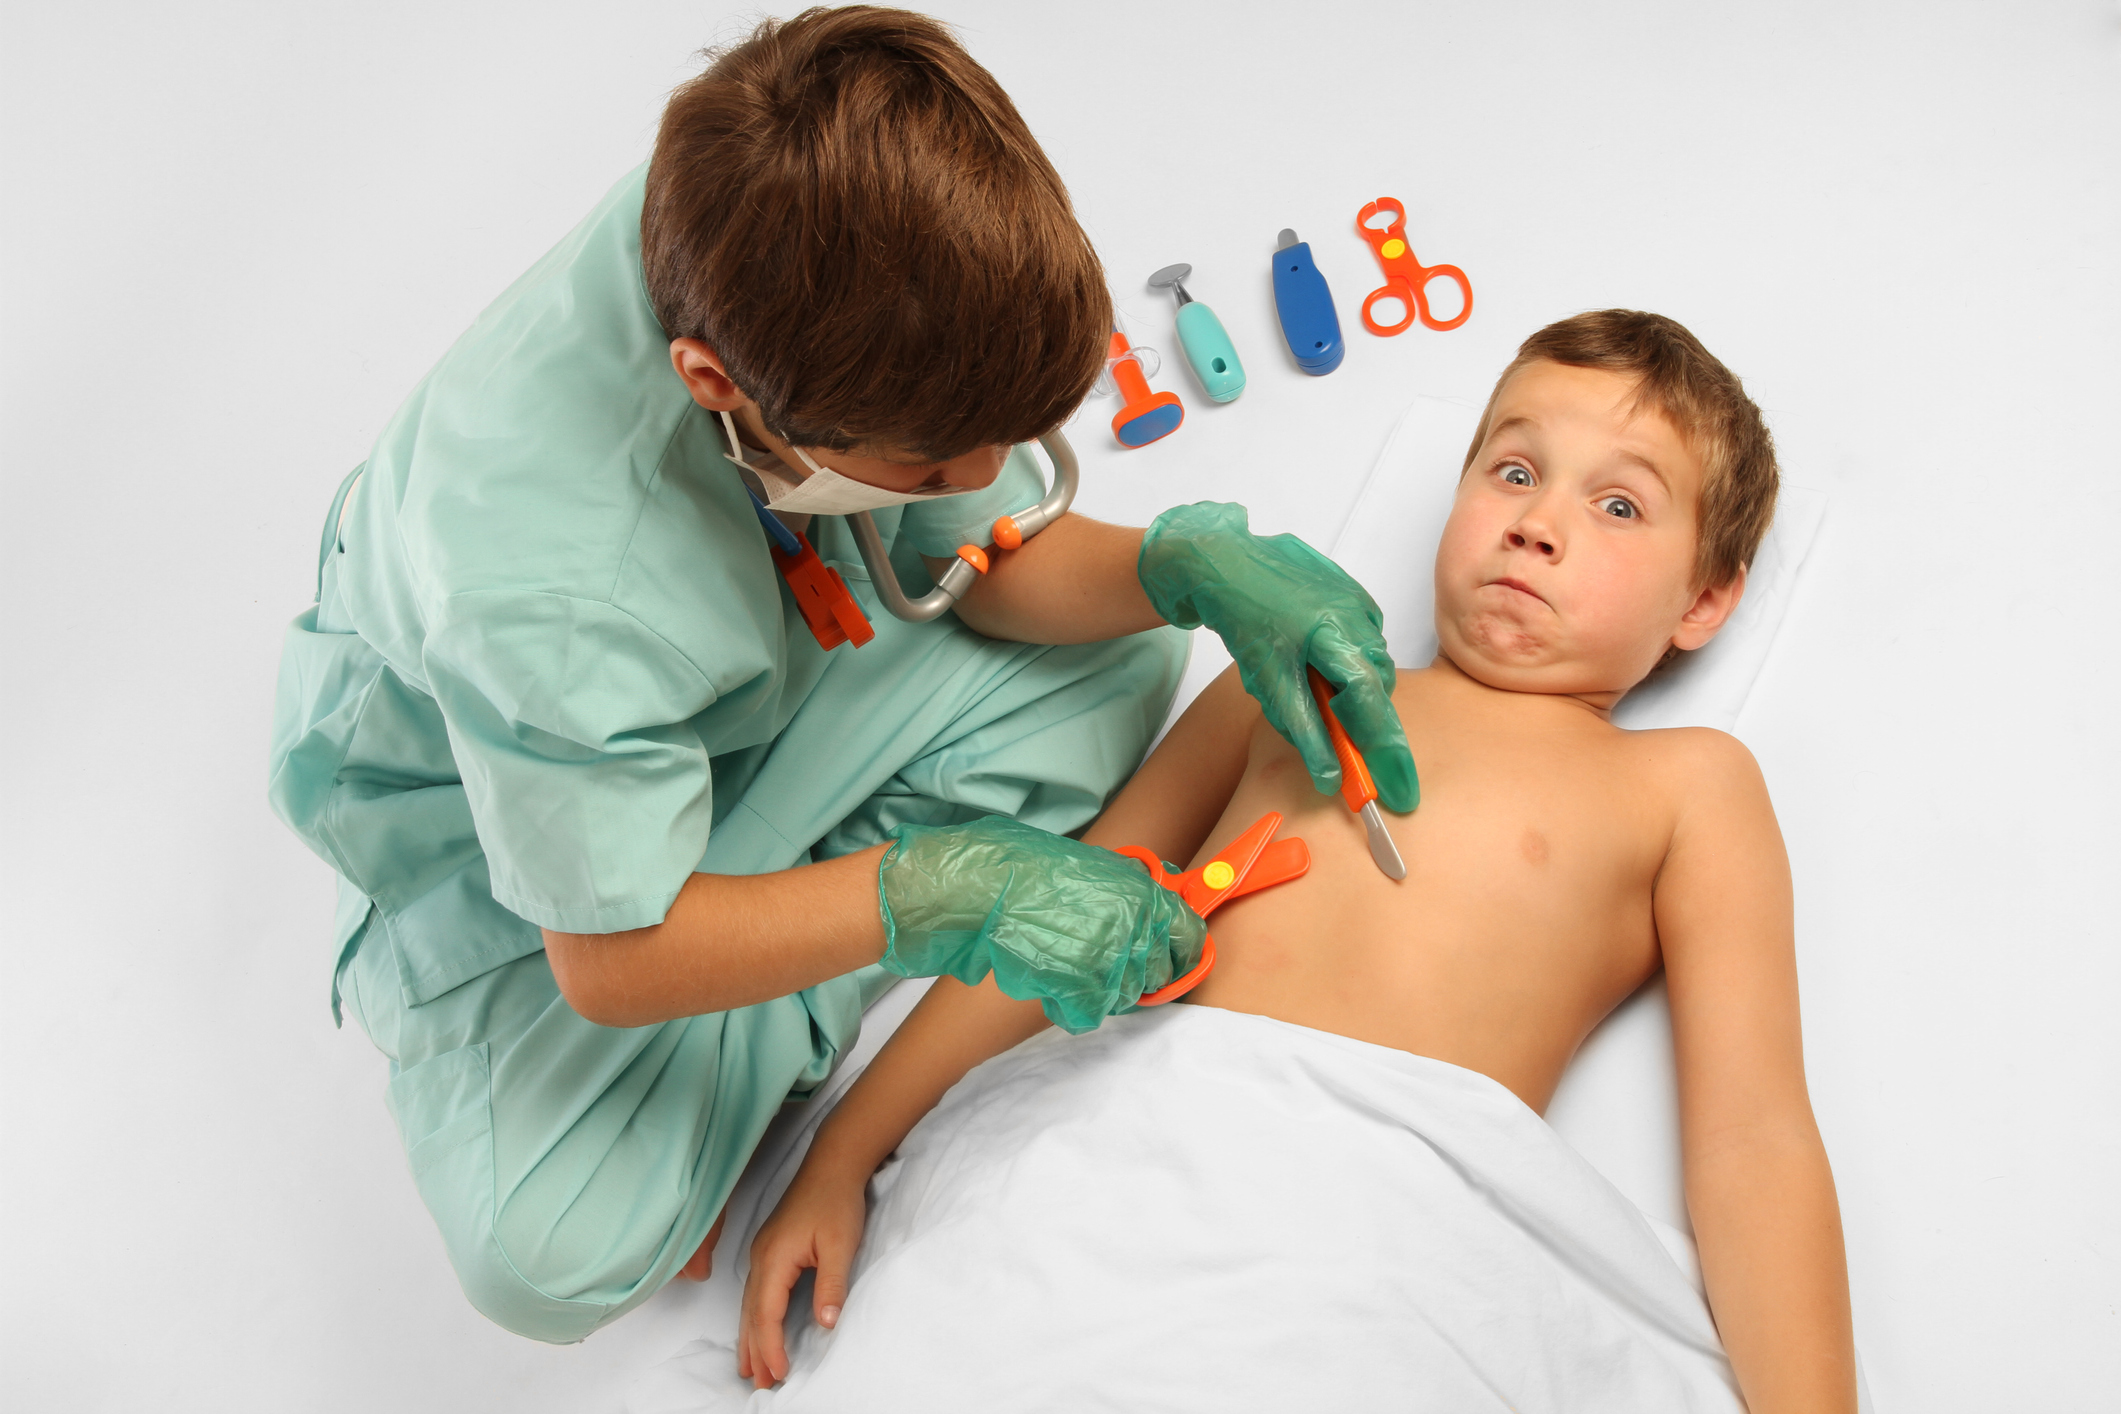 Young boys playing doctor